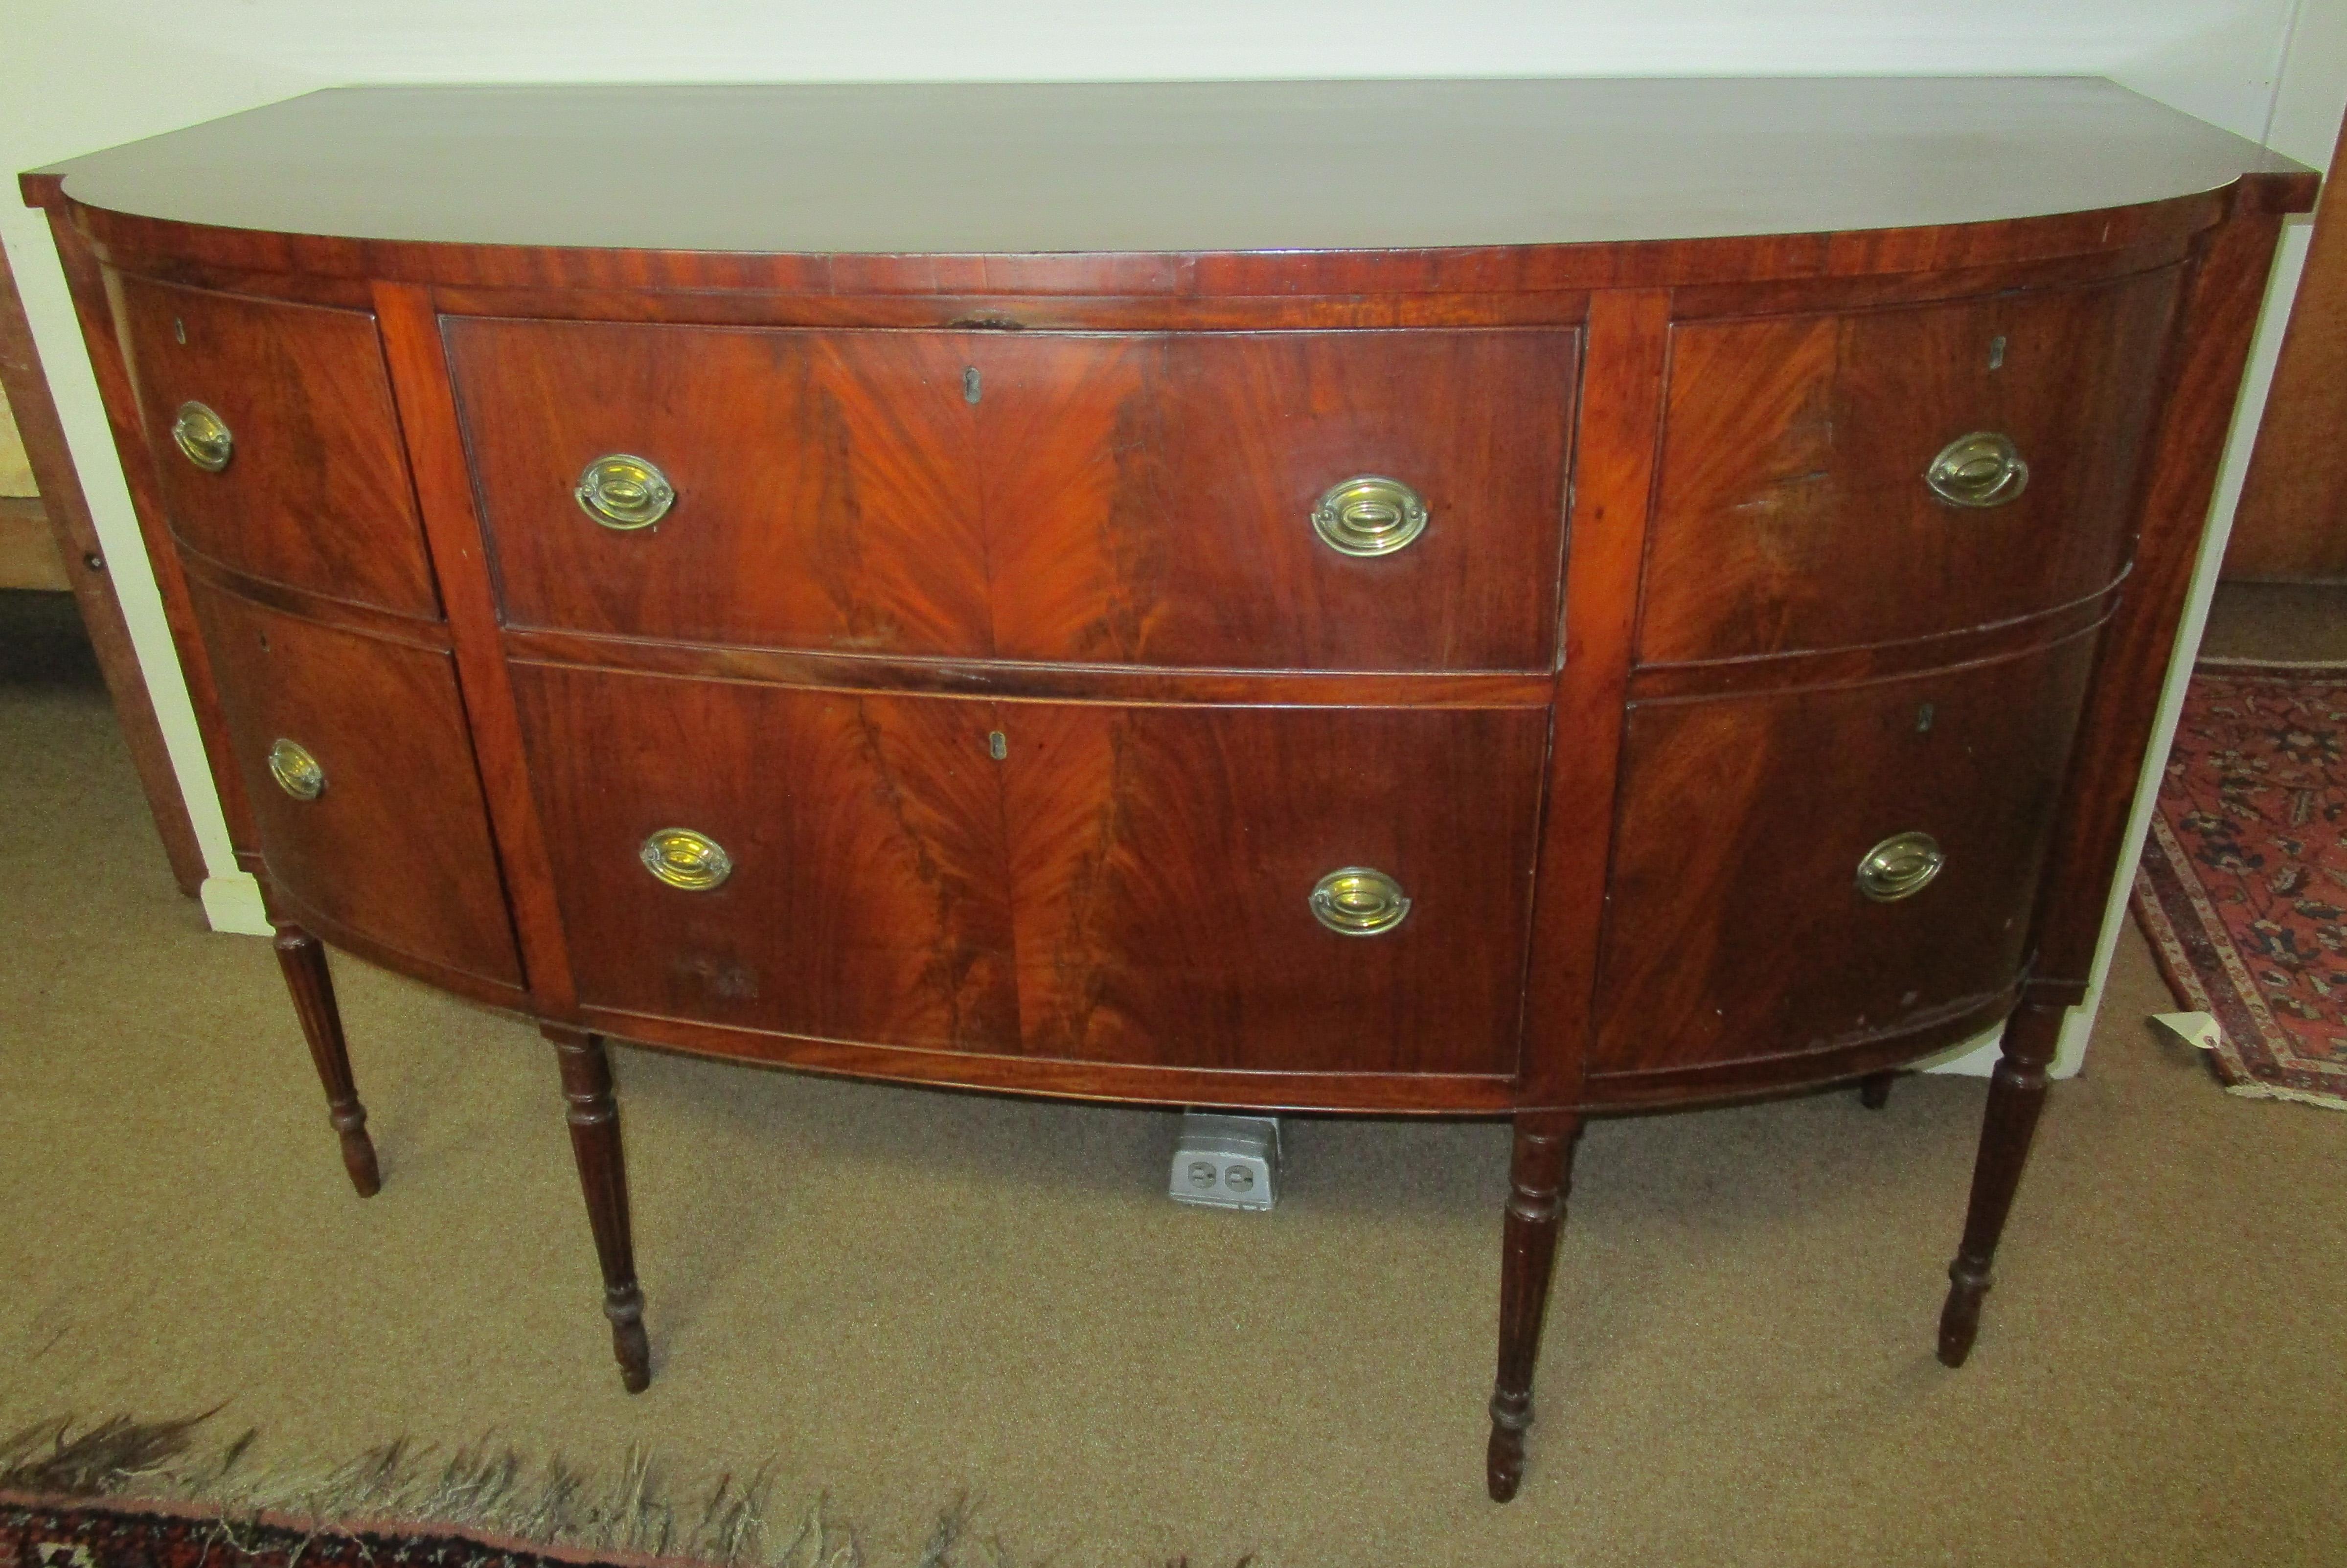 Early 19th Century Sheraton Style American Bowfront Sideboard with Dropdown Desk For Sale 5